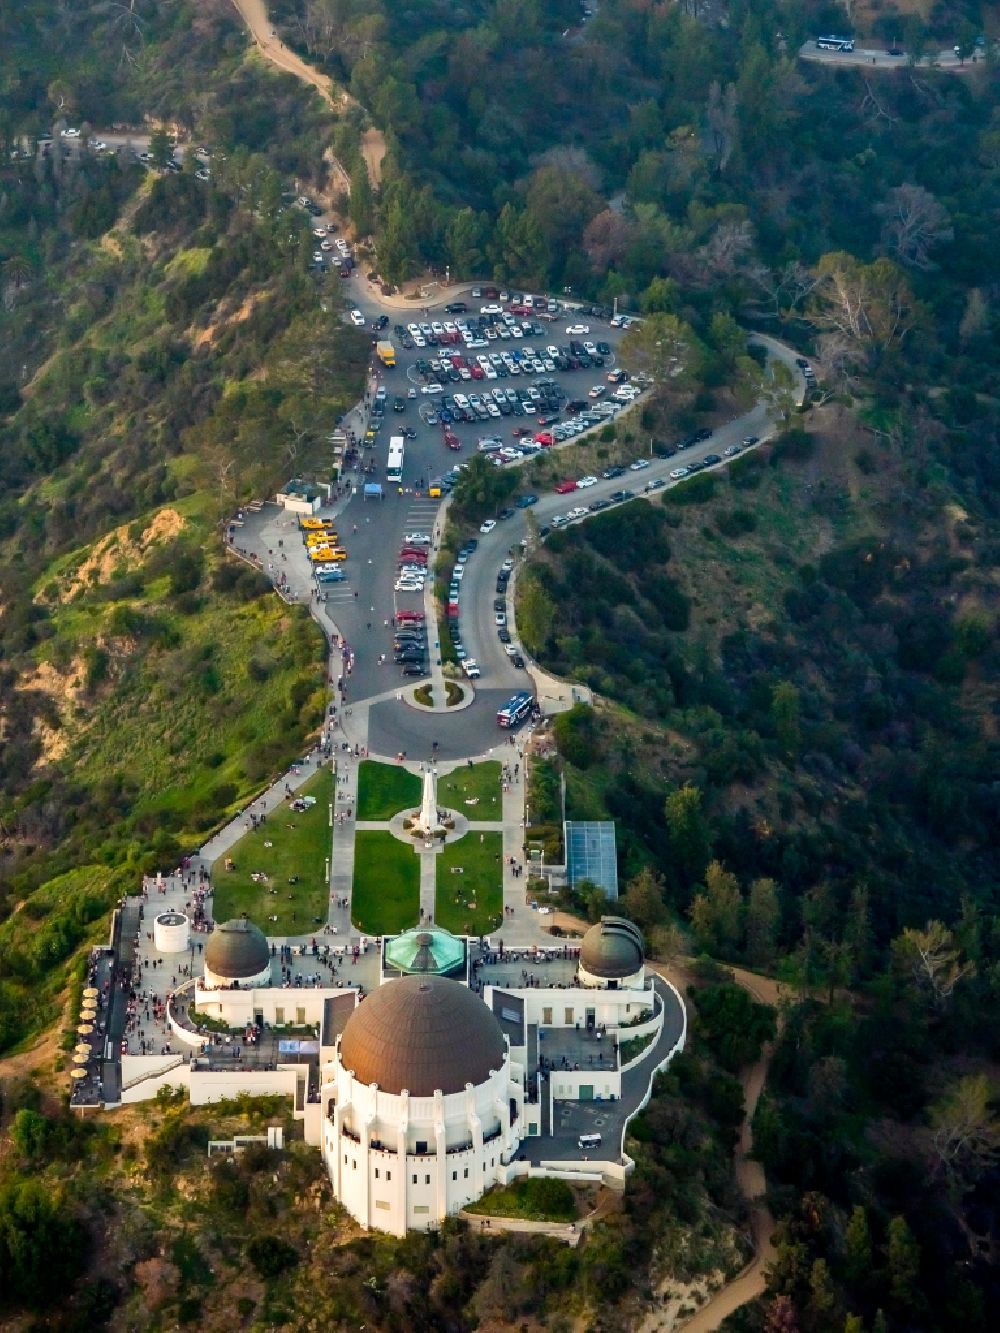 Aerial image Los Angeles - Observatory and Planetariumskuppel- constructional building complex of Griffith Observatory on Mount Hollywood in Los Angeles in California, USA